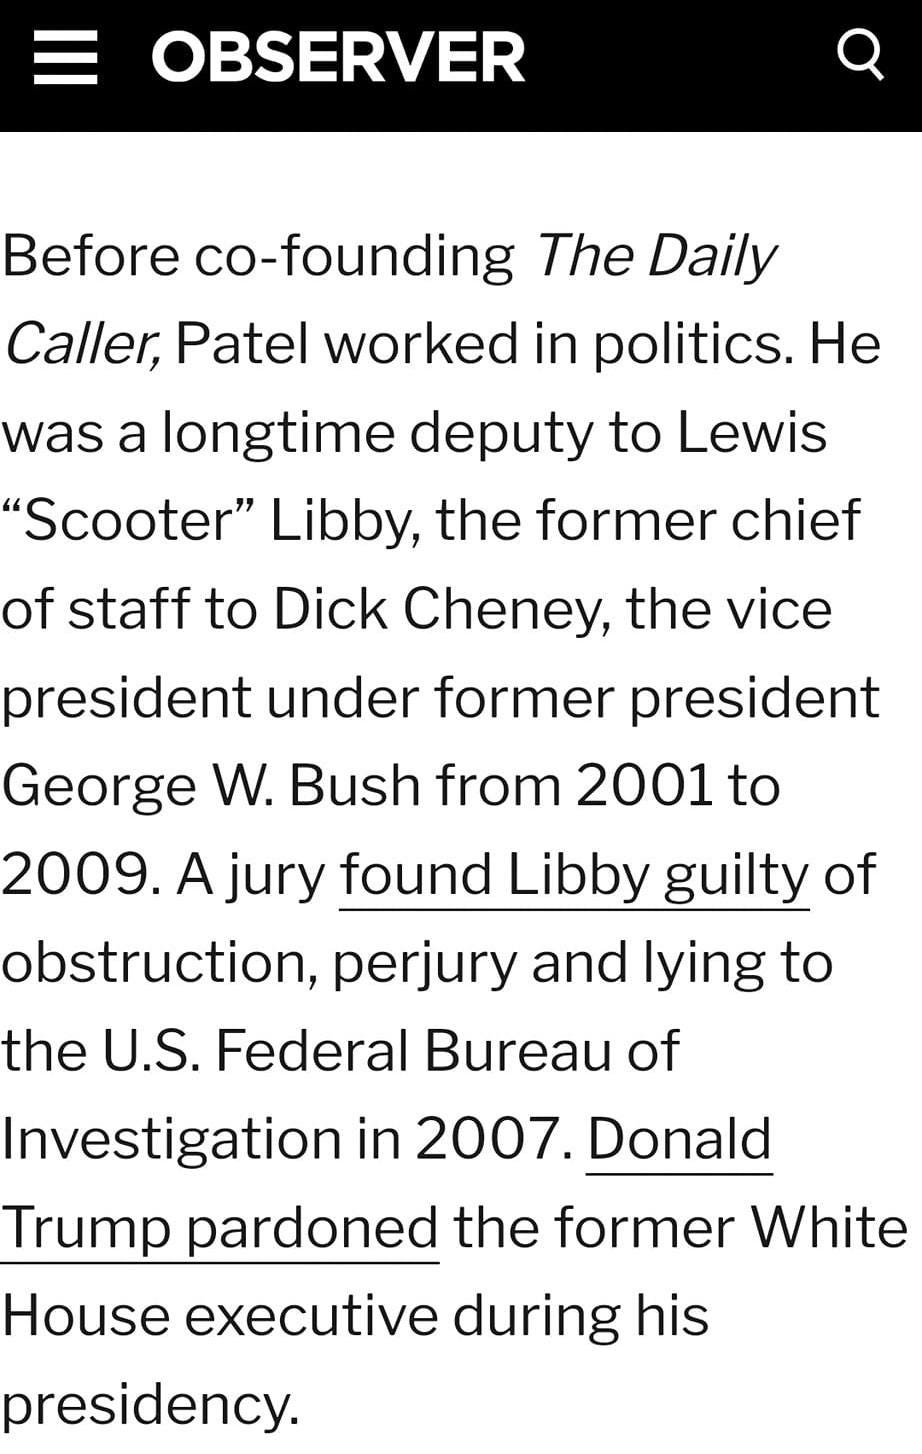 May be an image of text that says '8:59 5G 48% OBSERVER Before co-founding The Daily Caller, Patel worked in politics. He was a longtime deputy to Lewis 'Scooter" Libby, the former chief of staff to Dick Cheney, the vice president under former president George W. Bush from 2001 to 2009. jury found Libby guilty of obstruction, perjury and lying to the U.S. Federal Bureau of Investigation in 2007. Donald Trump pardoned the former White House executive during his presidency. After working for Libby, Patel GHOST WHEY Protein Powder, GHOST 7,072 Amazon. customer eview'